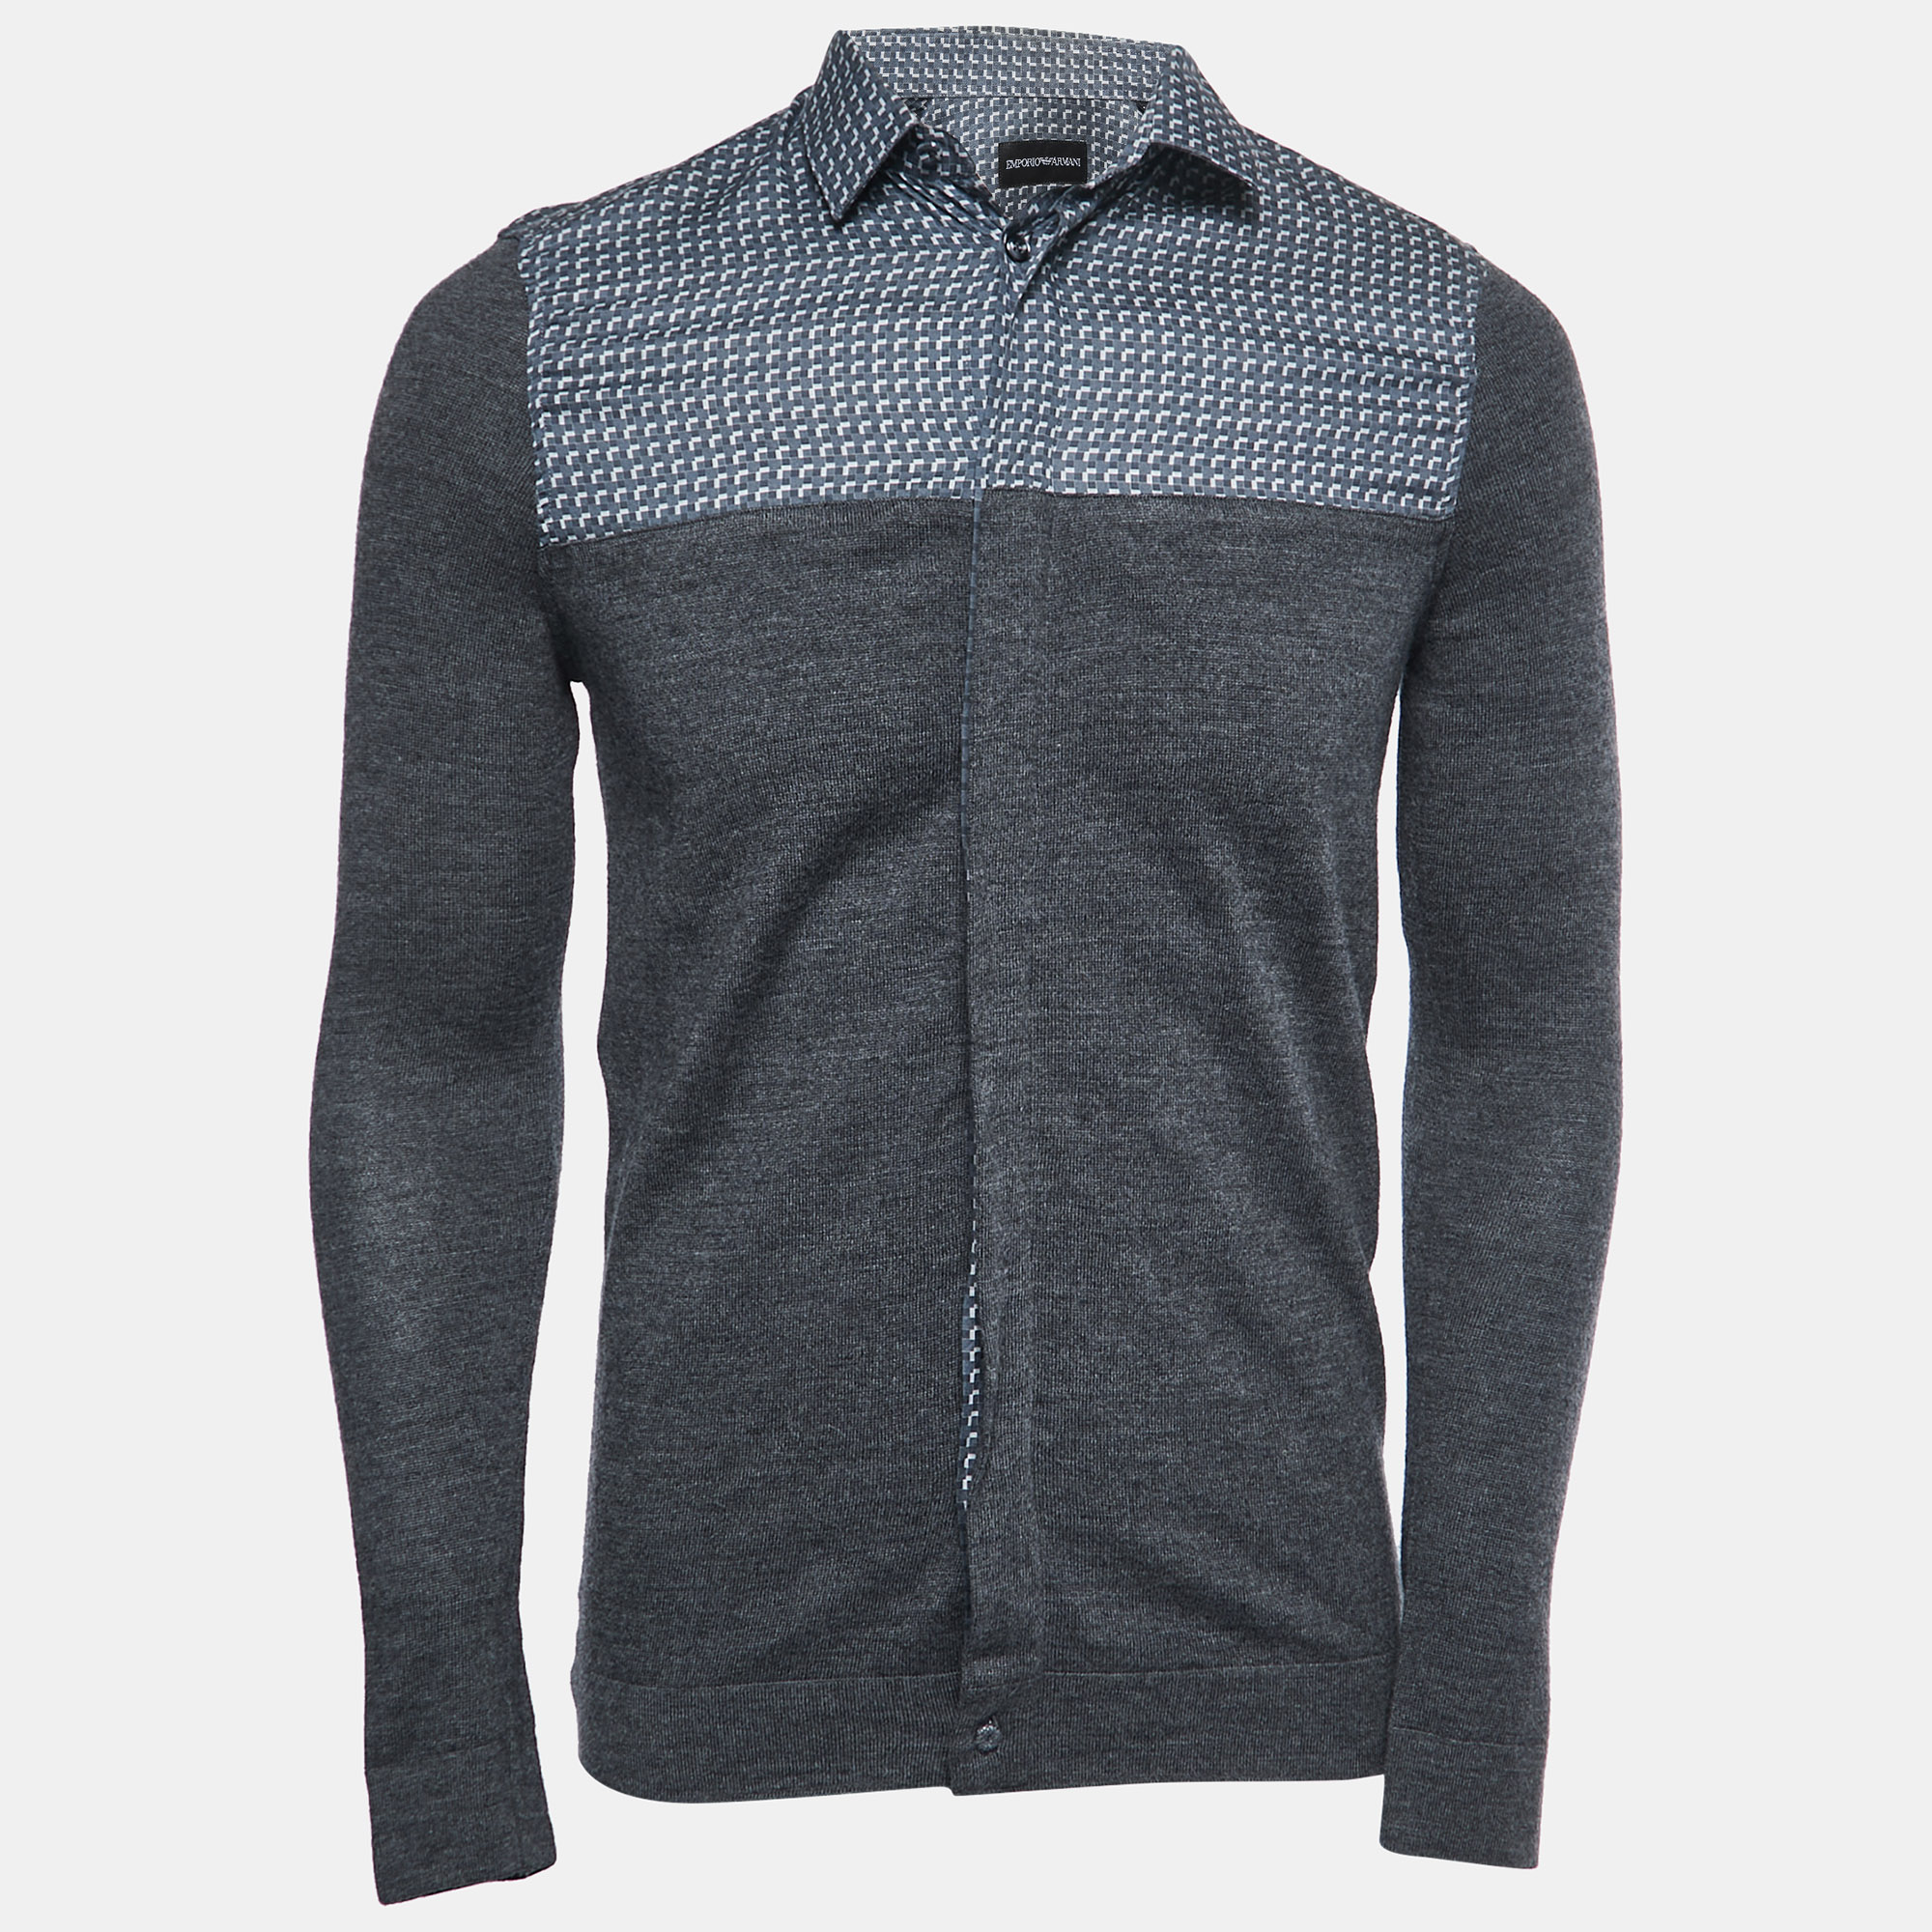 Emporio Armani Grey Patterned Cotton And Wool Knit Full Sleeve Shirt S